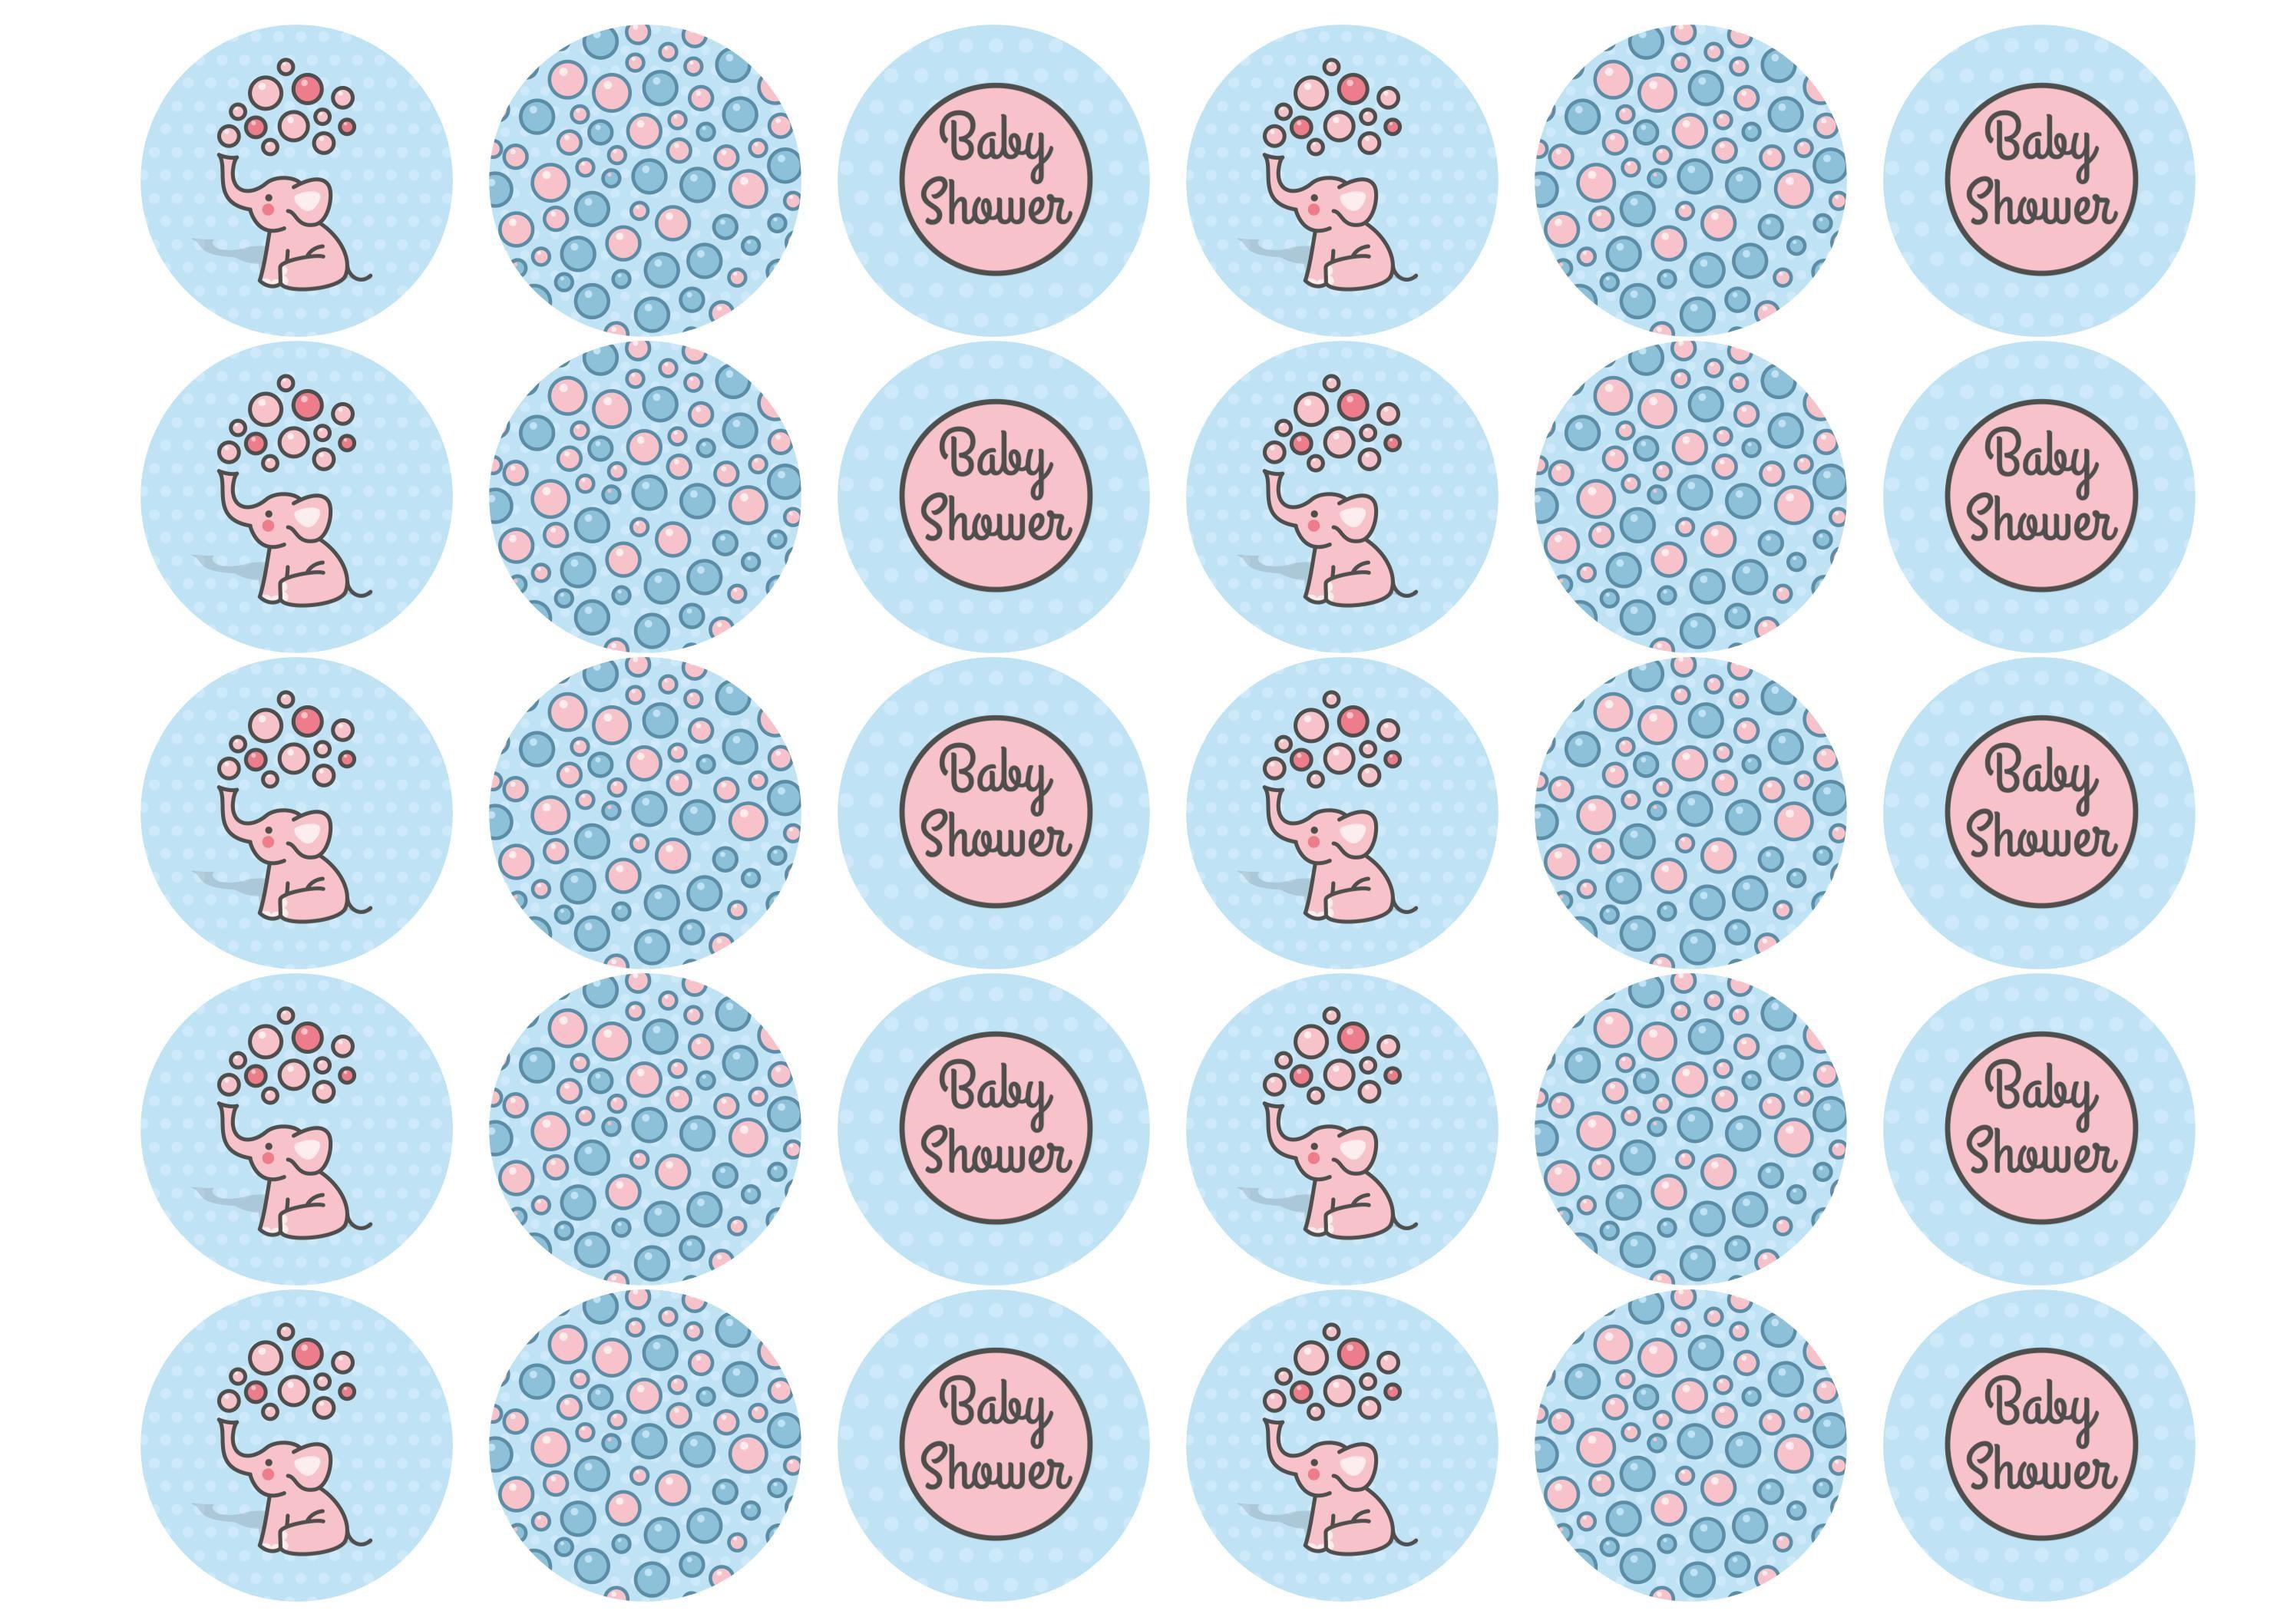 30 edible toppers with cute baby elephants for a baby shower in pink and blue